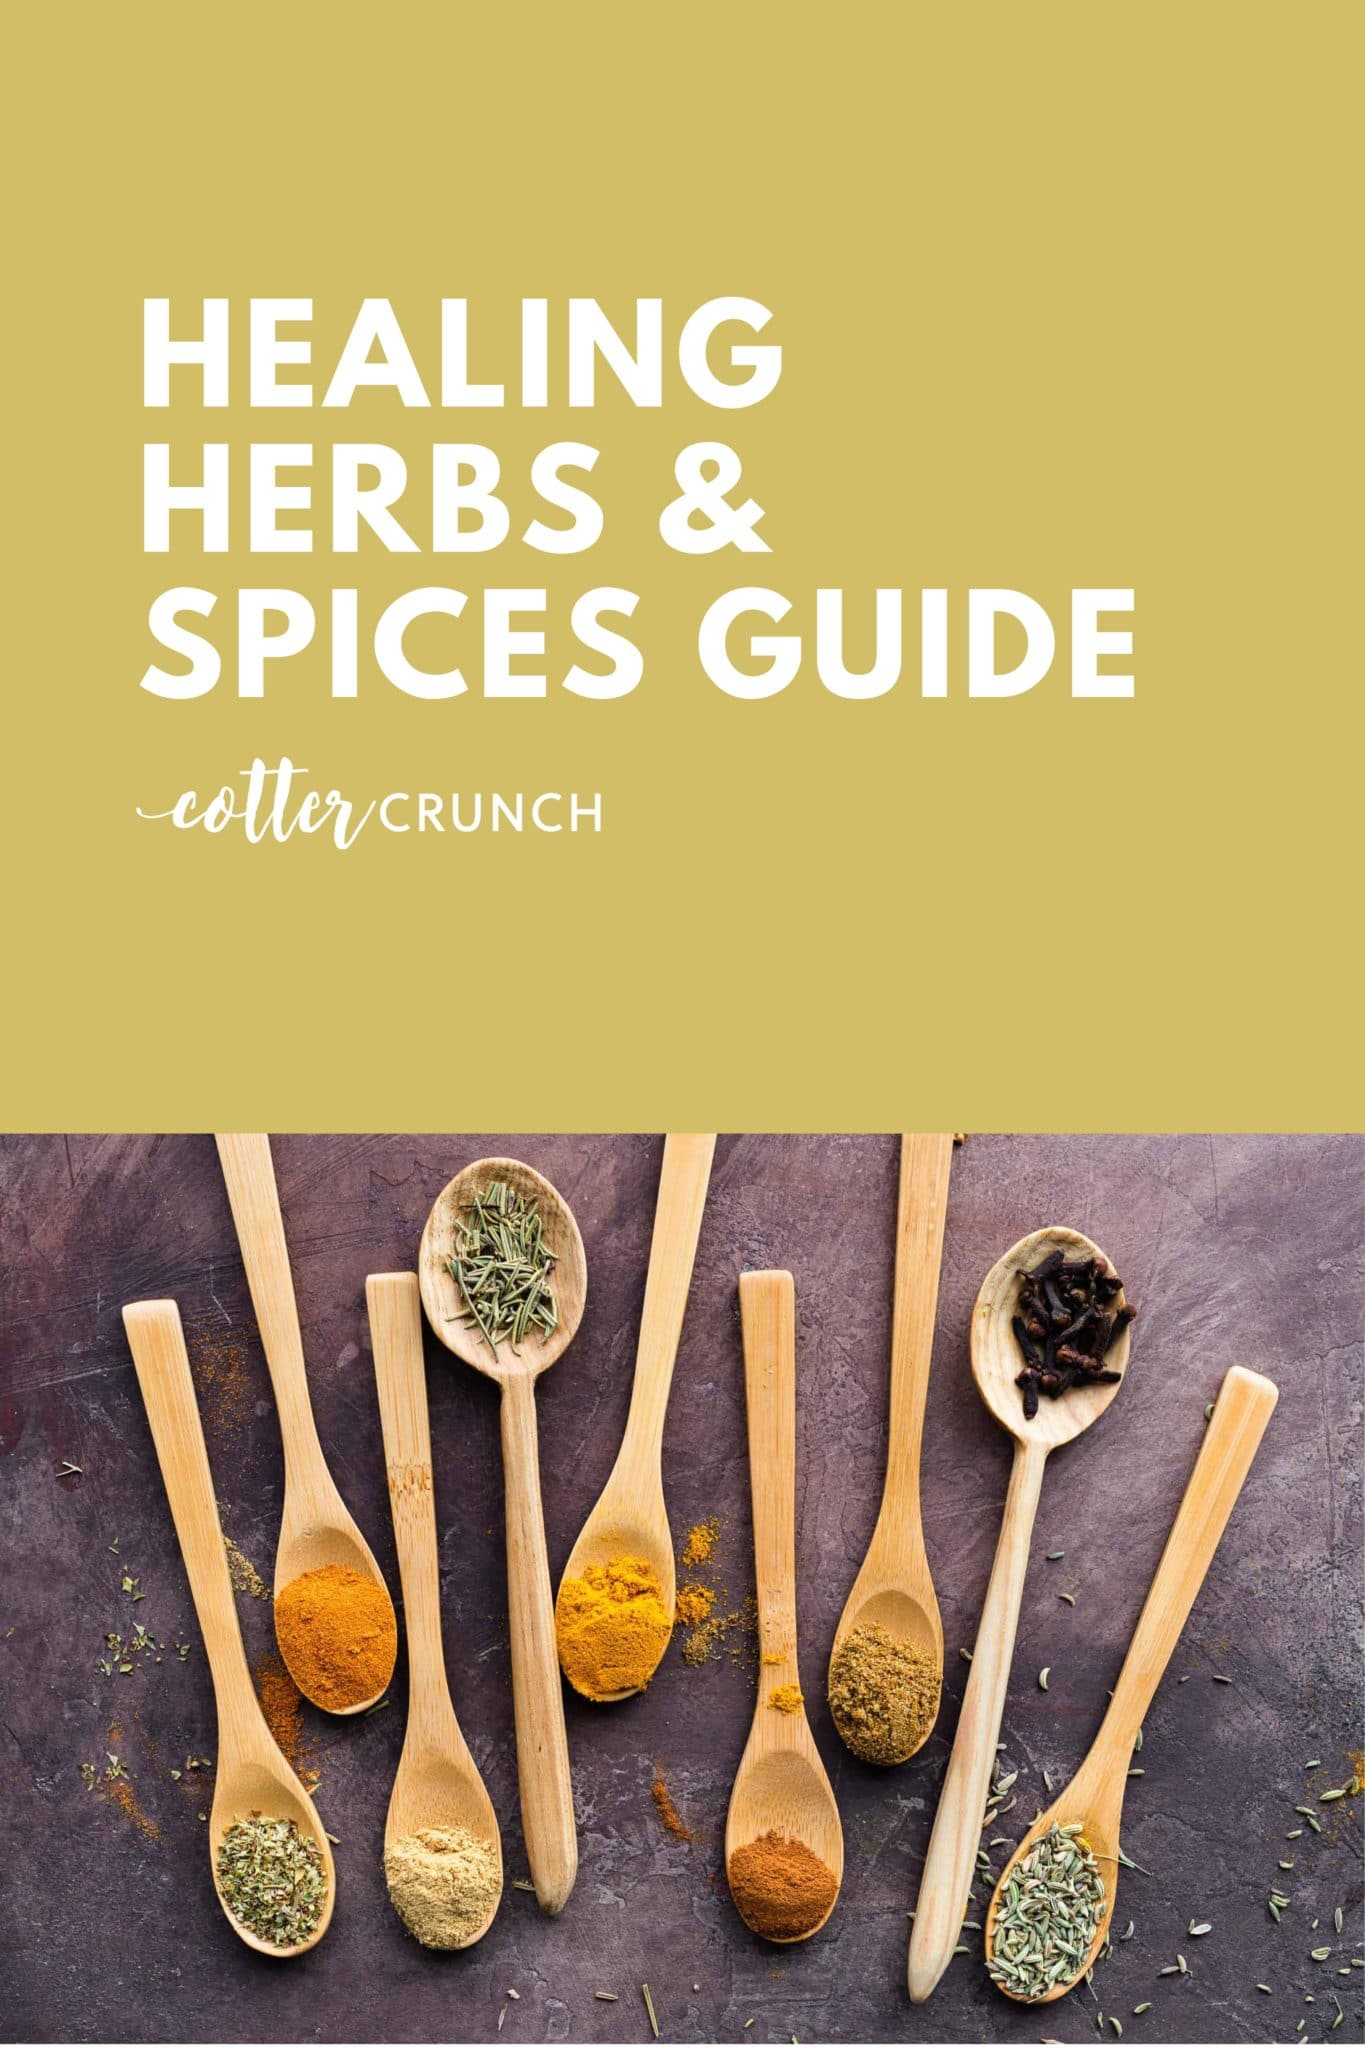 cover image reading Healing Herbs & Spices Guide with herbs and spices in wooden spoons